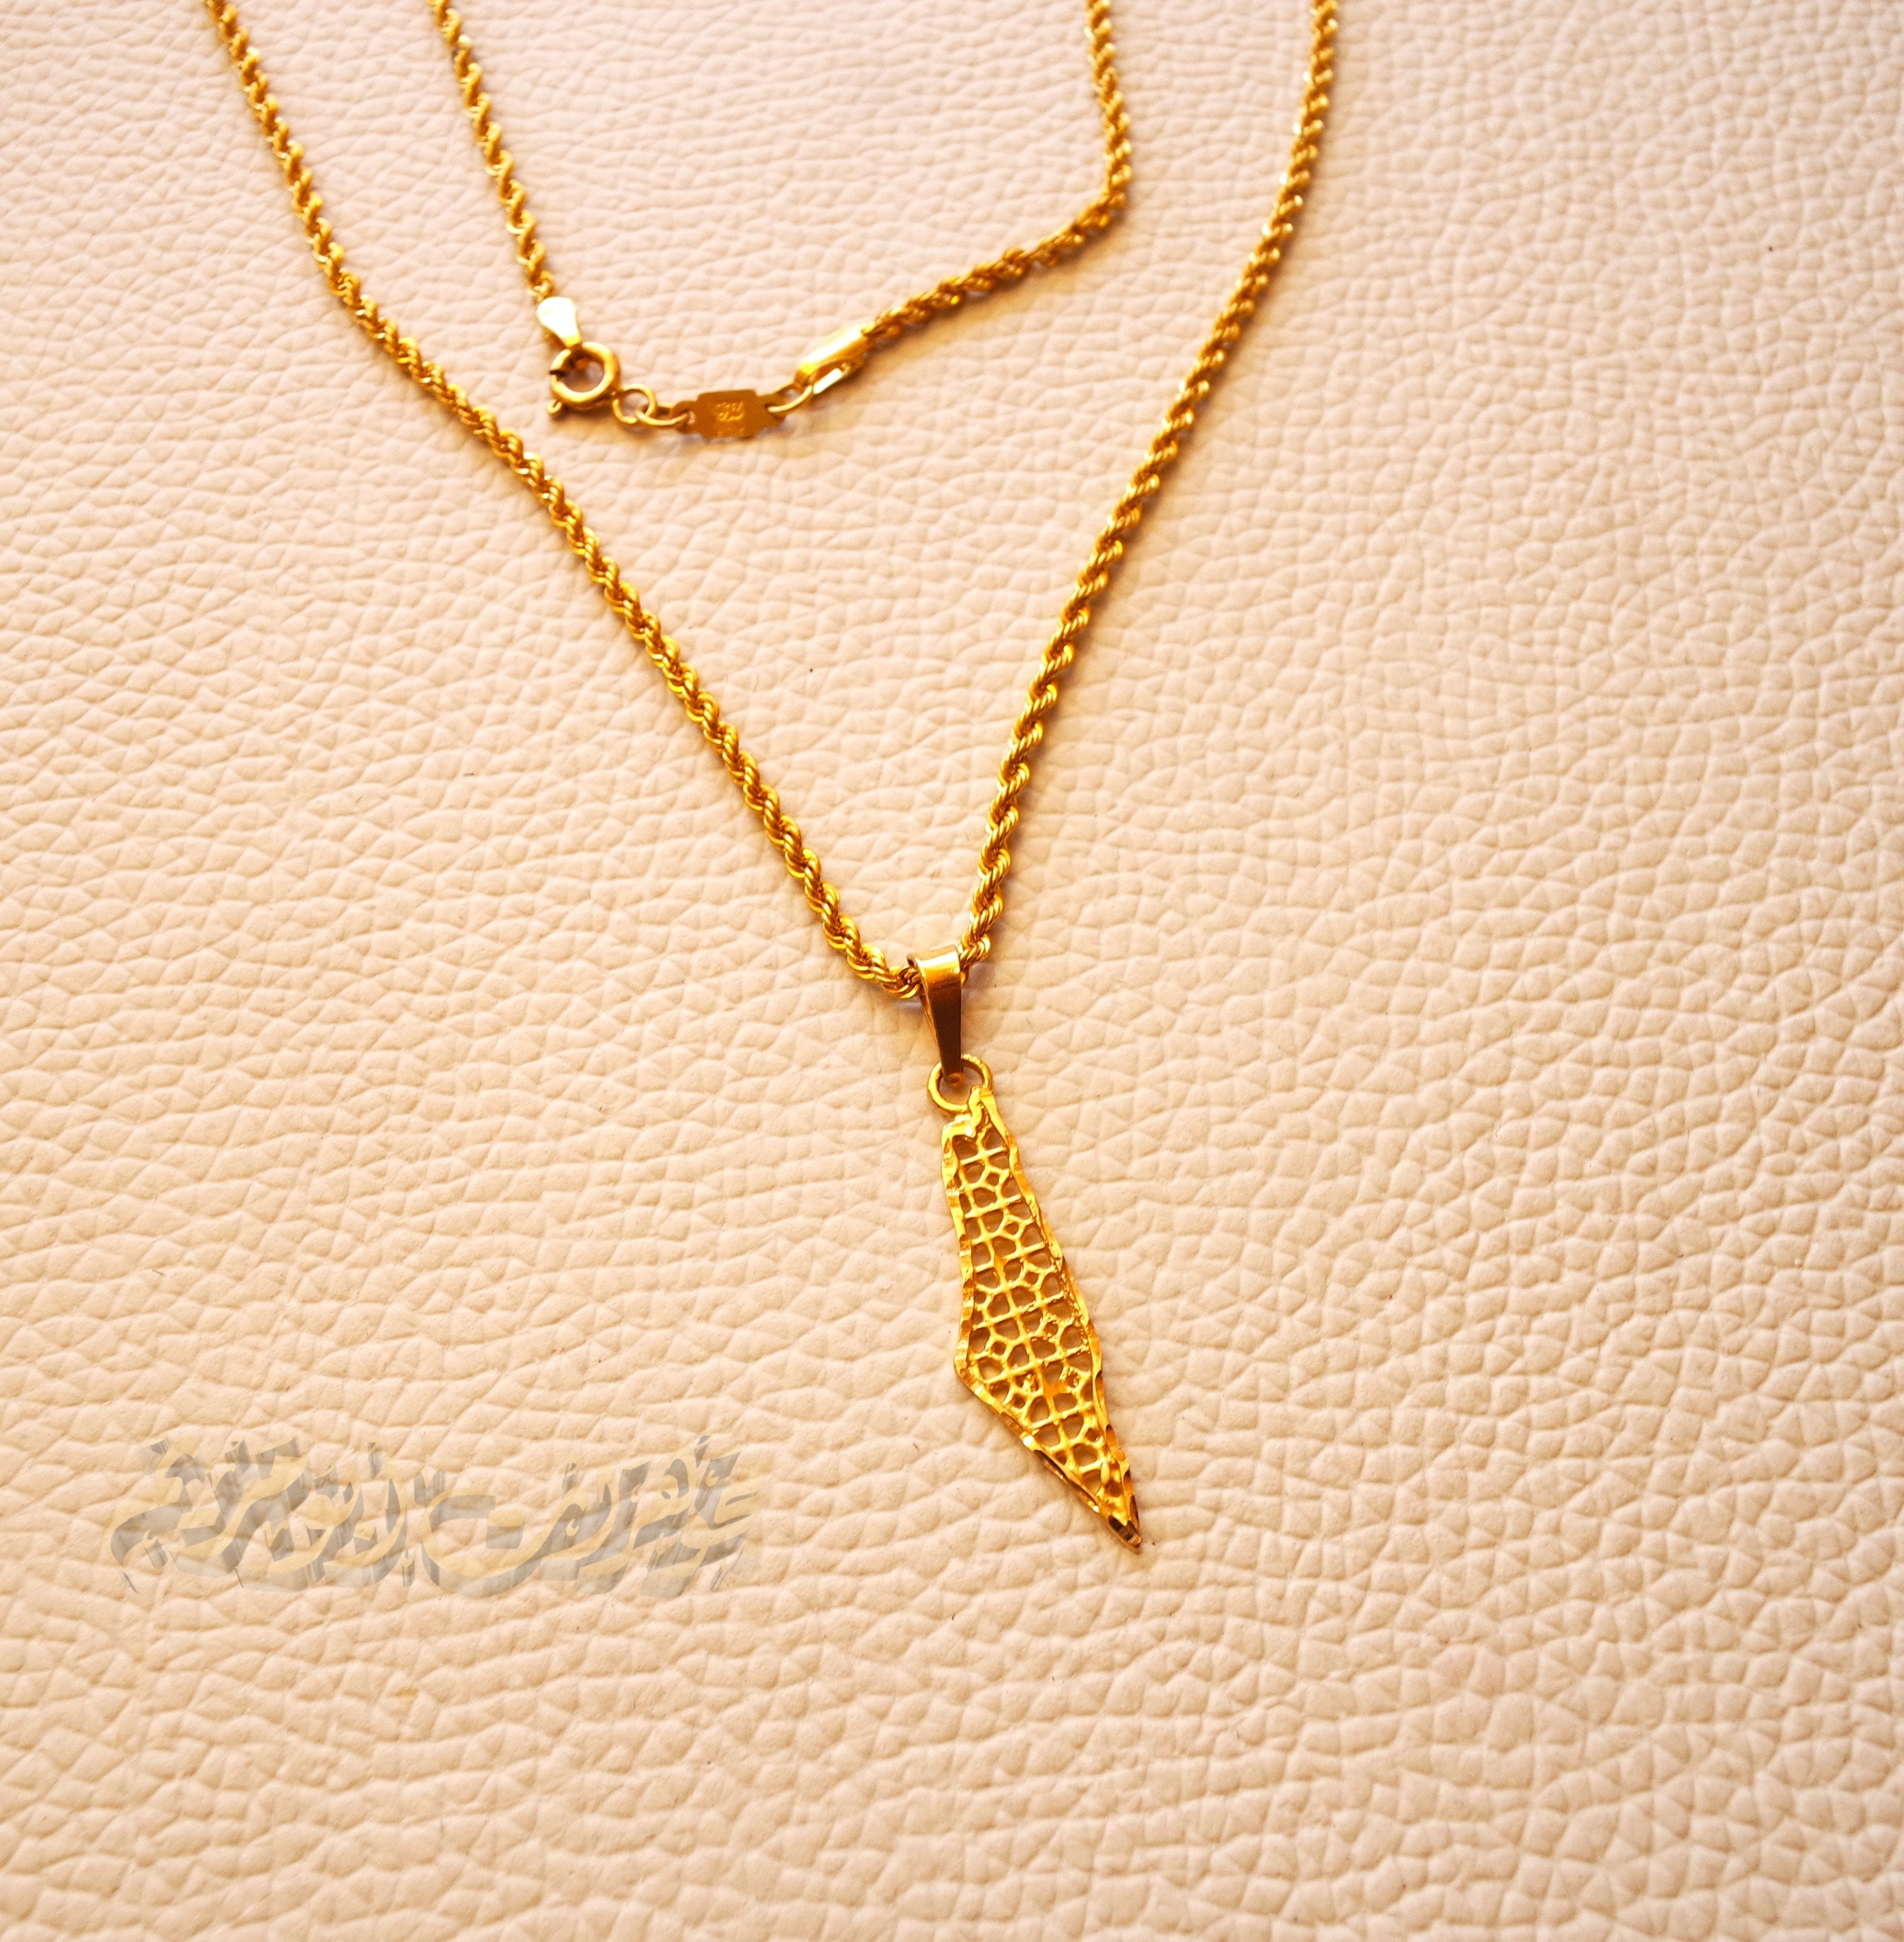 21K gold Palestine map pendant with rope chain gold jewelry arabic fast shipping 2 sizes خارطه و علم فلسطين